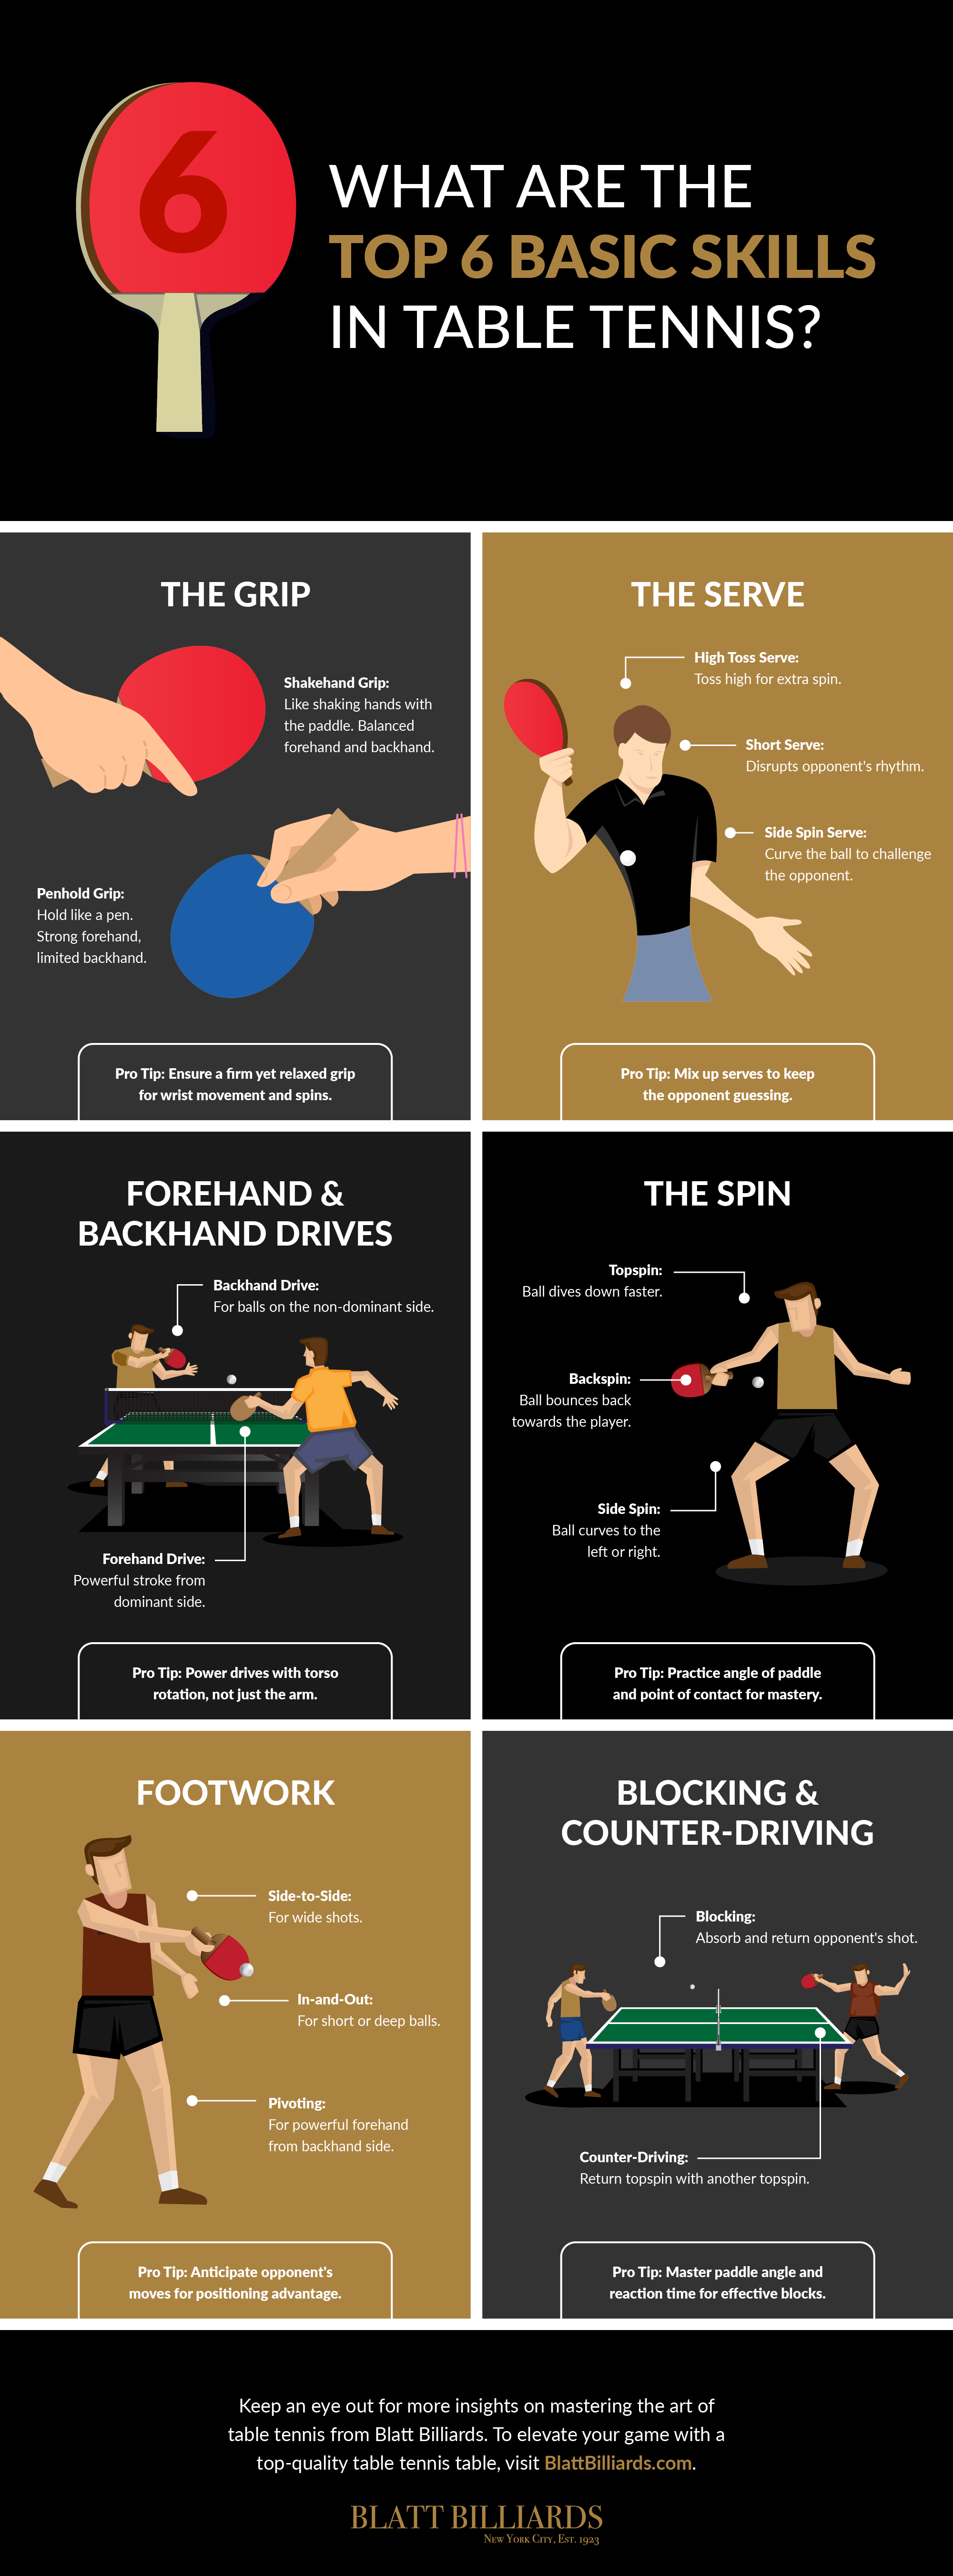 What Are the Top 6 Basic Skills in Table Tennis Infographic